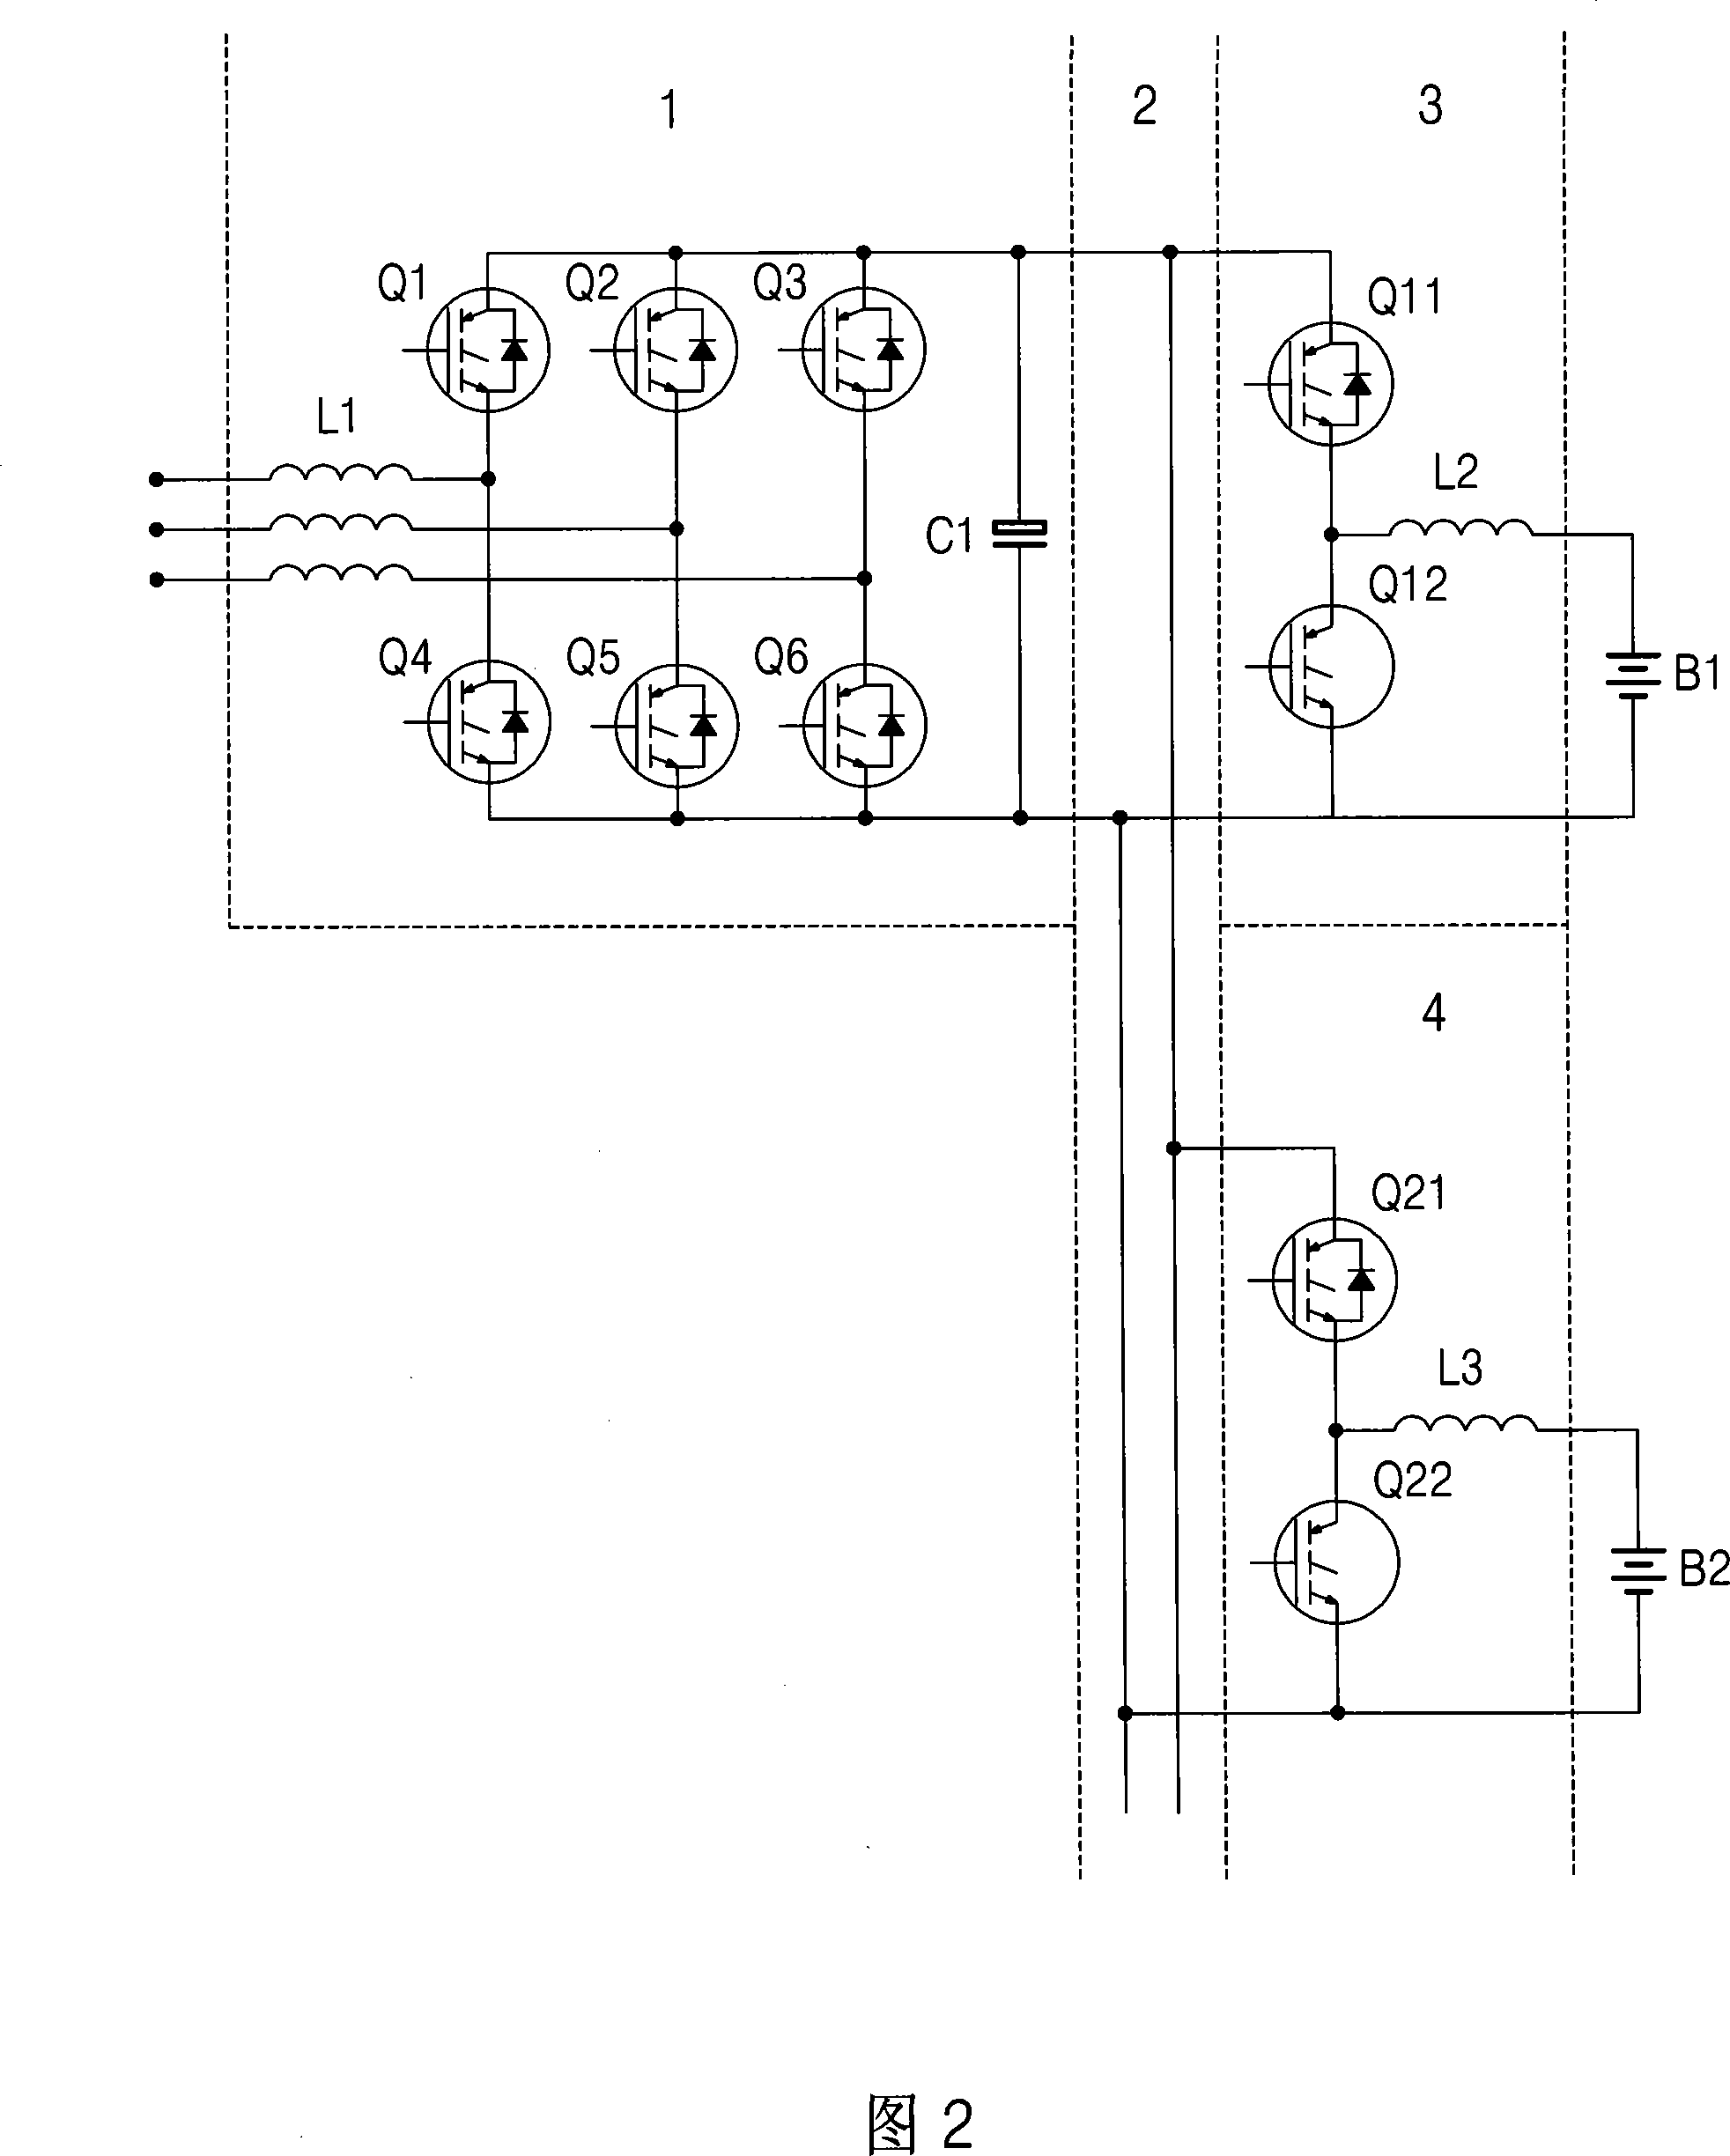 Main circuit structure for changing storage battery into charge and discharge